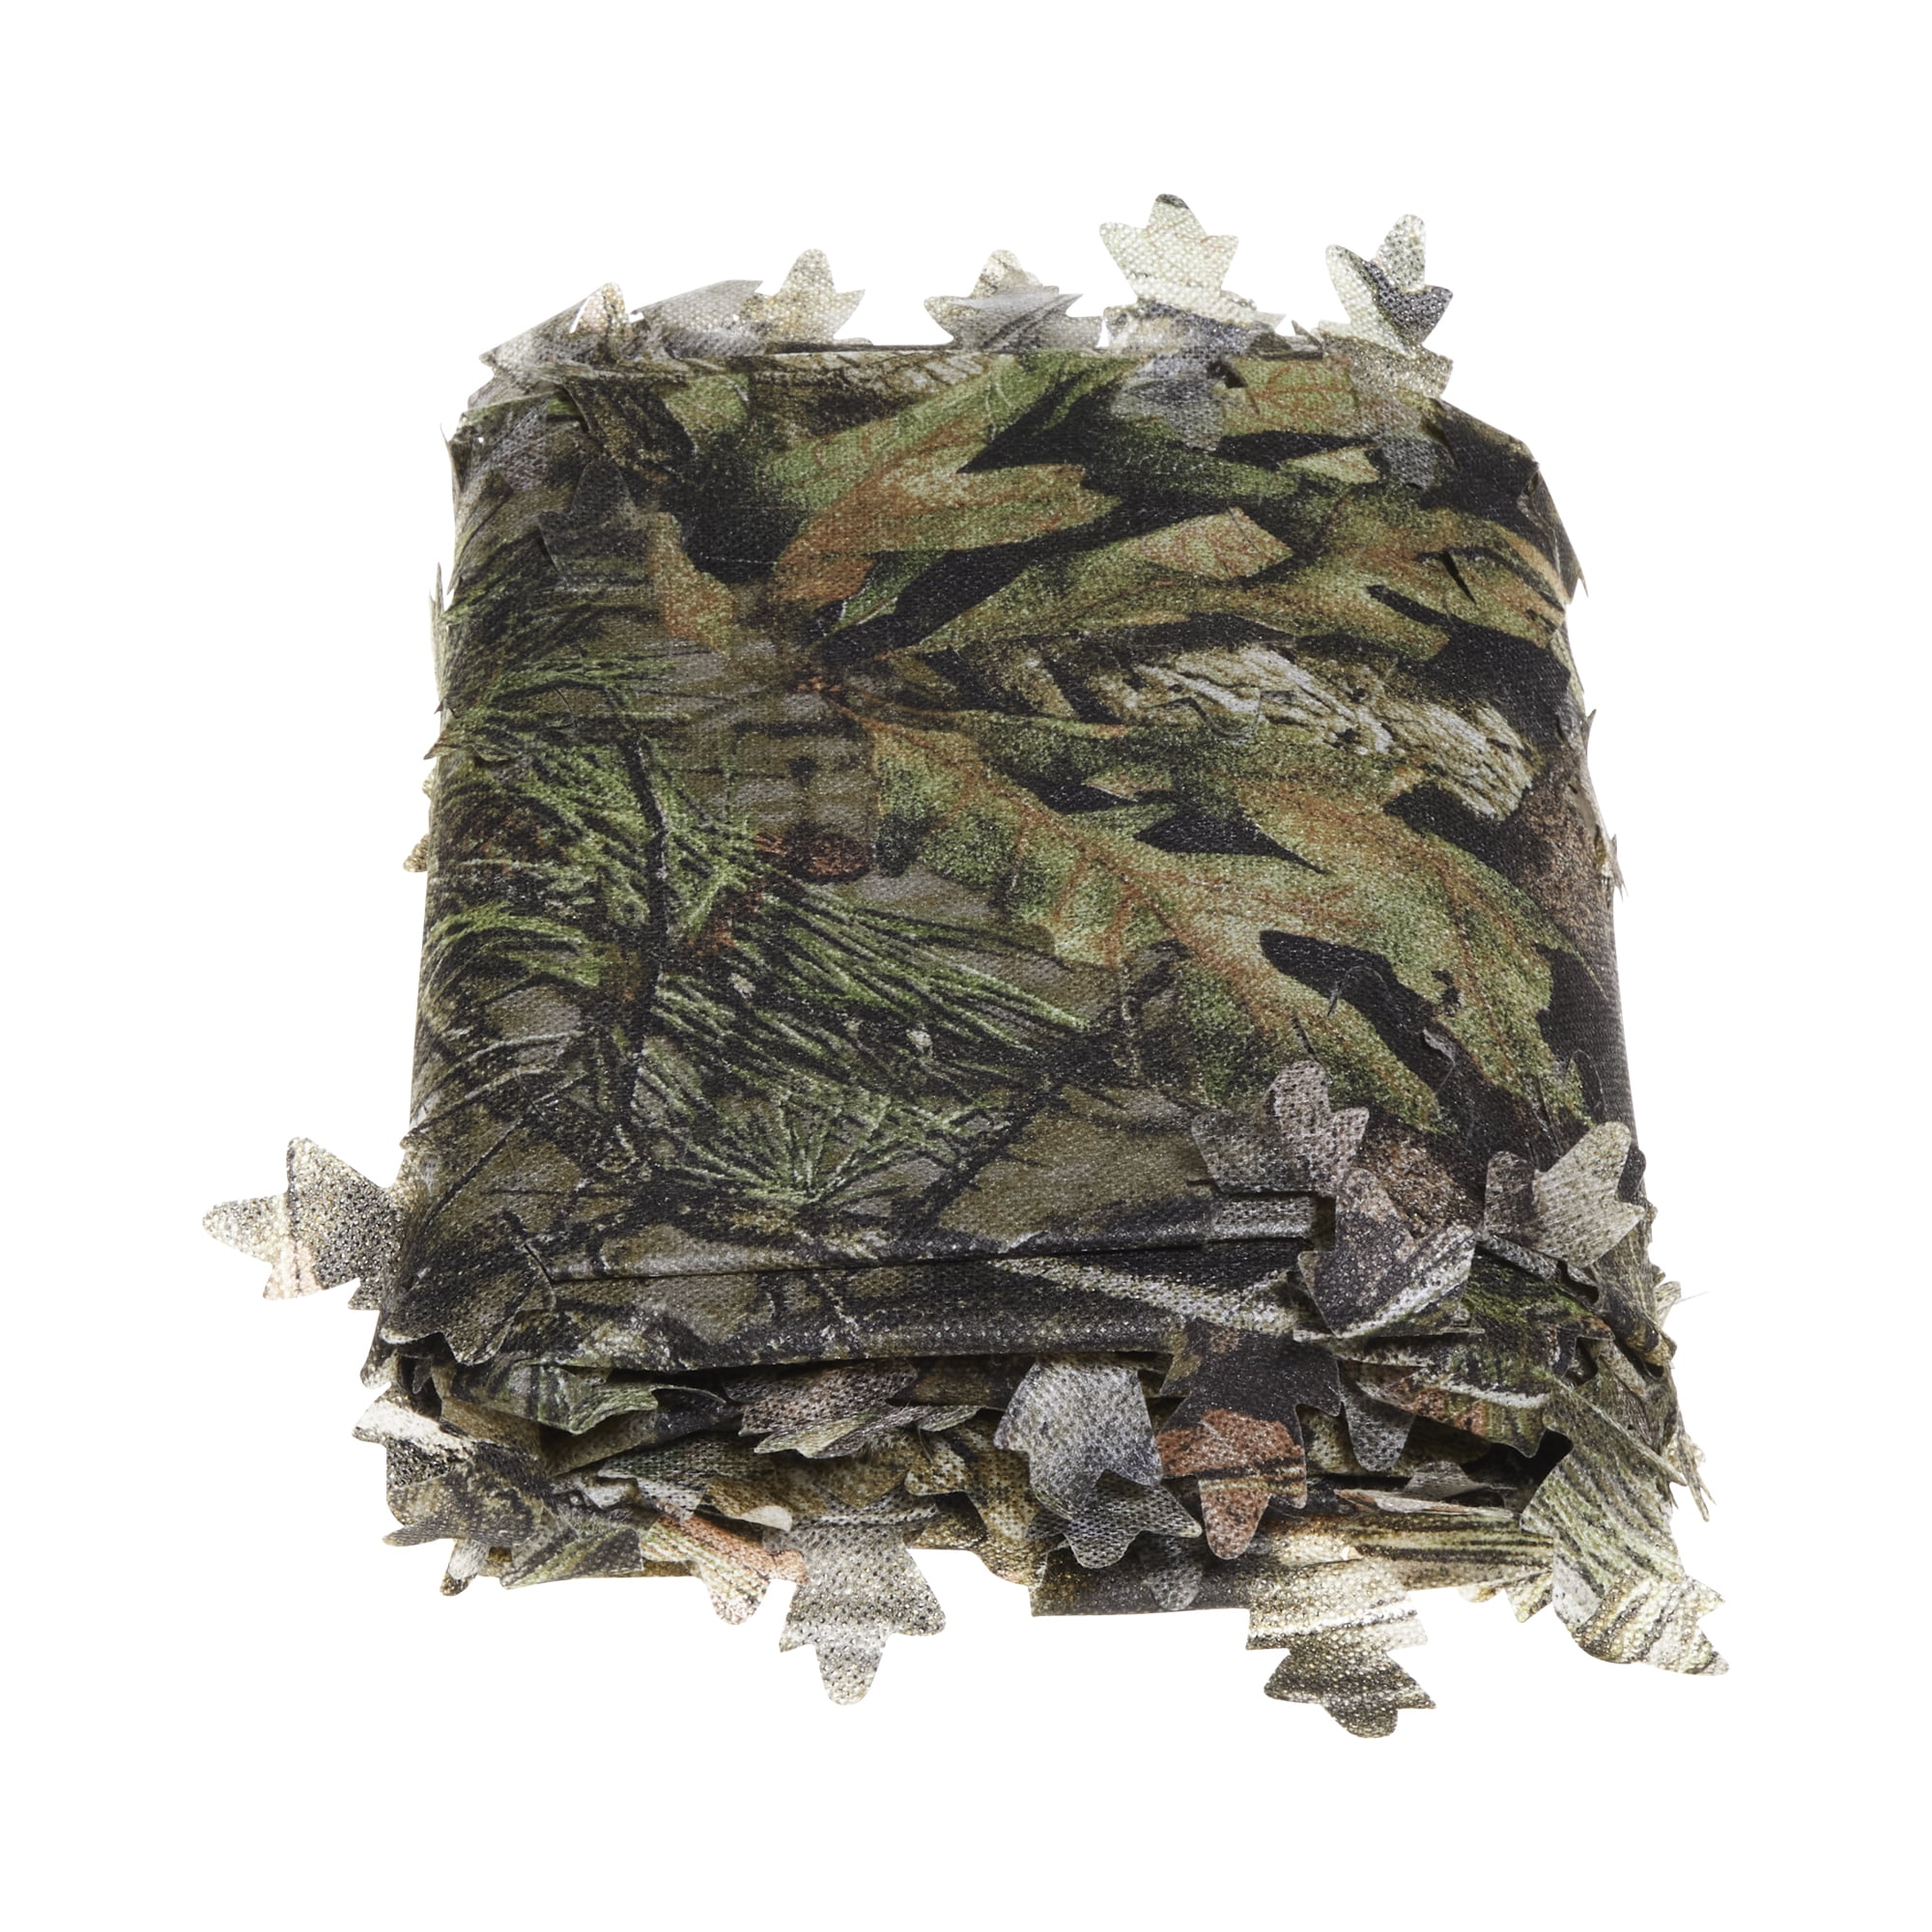 Mossy Oak Omnitex 3d Camo Blind Fabric 12ft X 56 Inches High 25762A for sale online 